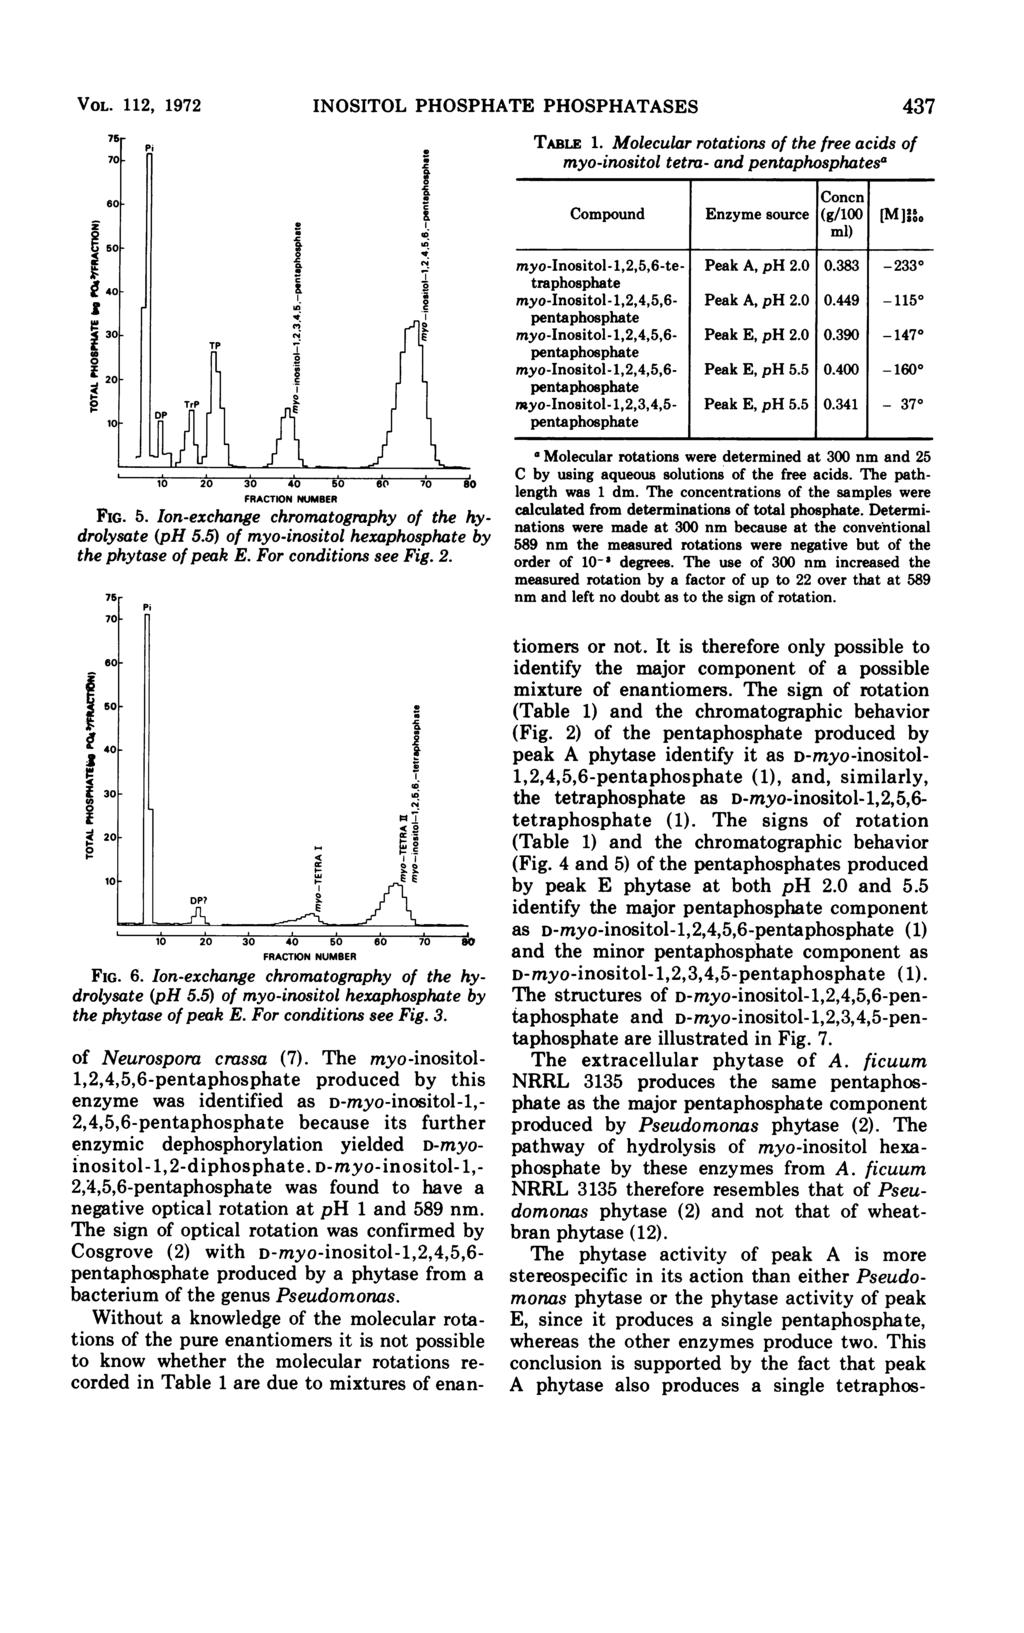 VOL. 112, 1972 INOSITOL PHOSPHATE PHOSPHATASES 437 FIG. 5. Ion-exchange chromatography of the hydrolysate (ph 5.5) of myo-inositol hexaphosphate by the phytase of peak E. For conditions see Fig. 2.